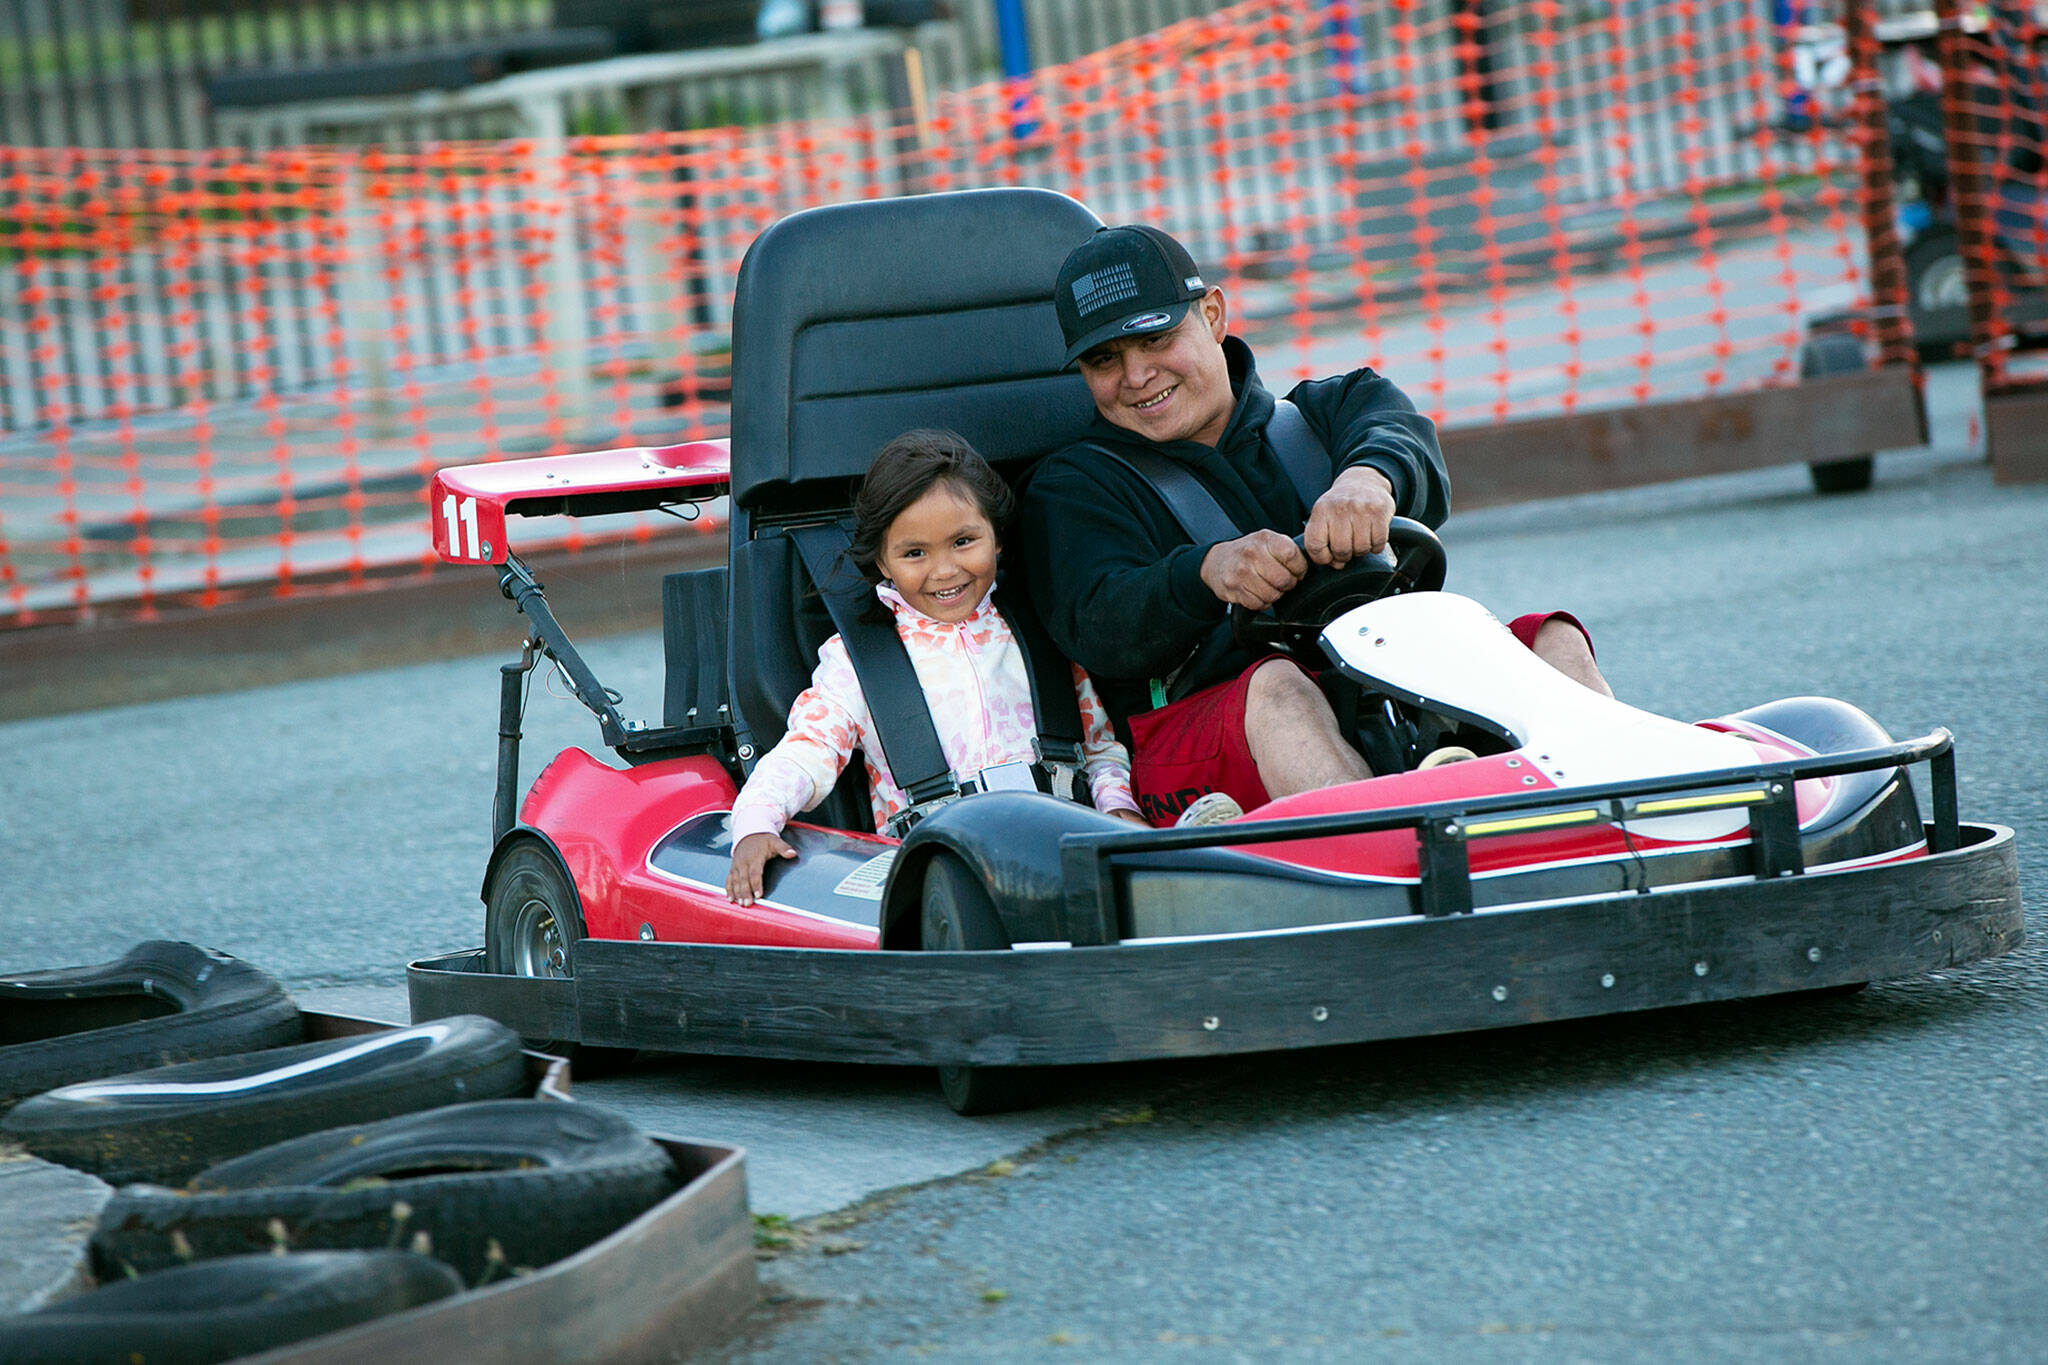 Angelina Jimmy, 6, and Brandon Cayou drive together in a go-kart at the Blue Fox Drive-In Theater in Oak Harbor. (Ryan Berry / The Herald)